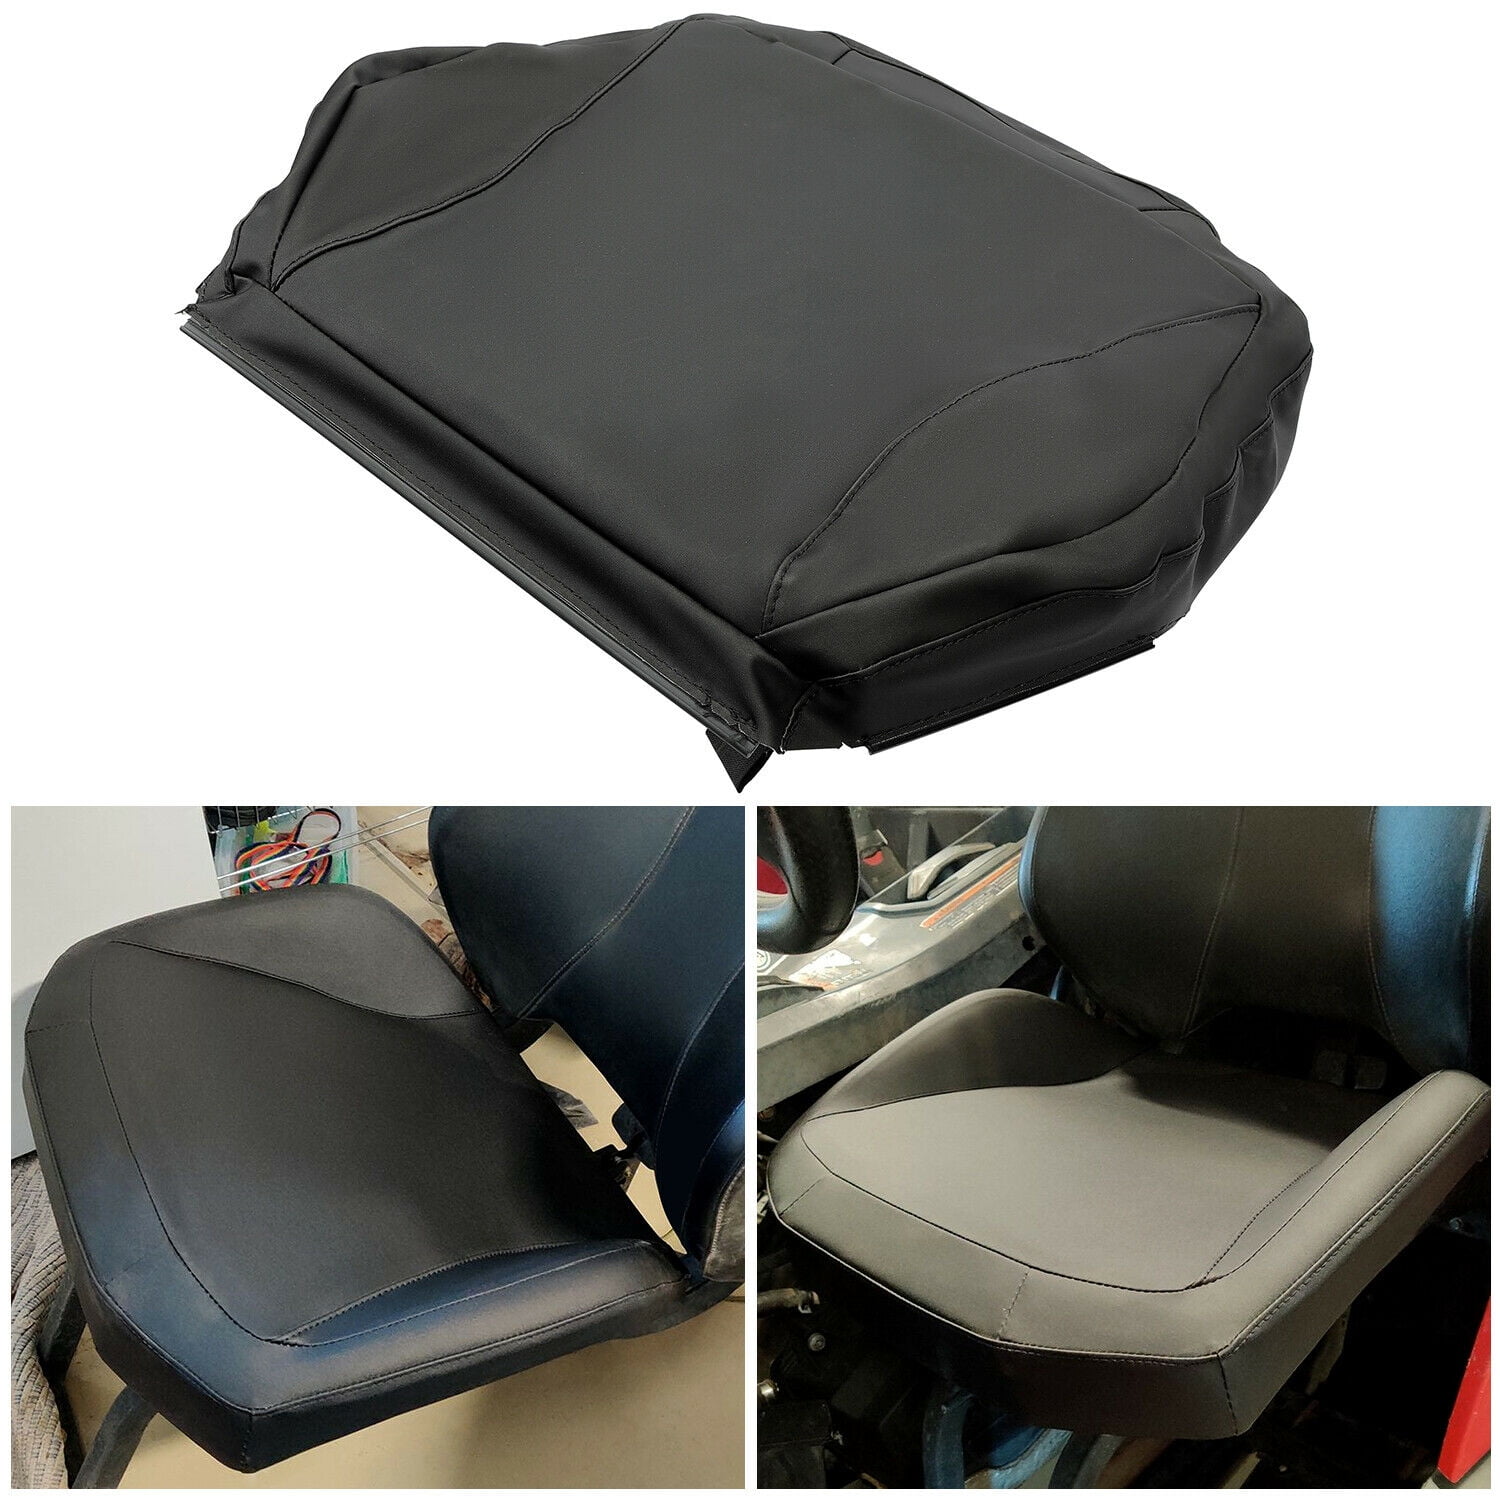 HECASA Seat Cushion & Cover Compatible with 2011-2020 Can-Am Commander/ Maverick Bottom Cushion Kit Assembly Replacement for 703500943 